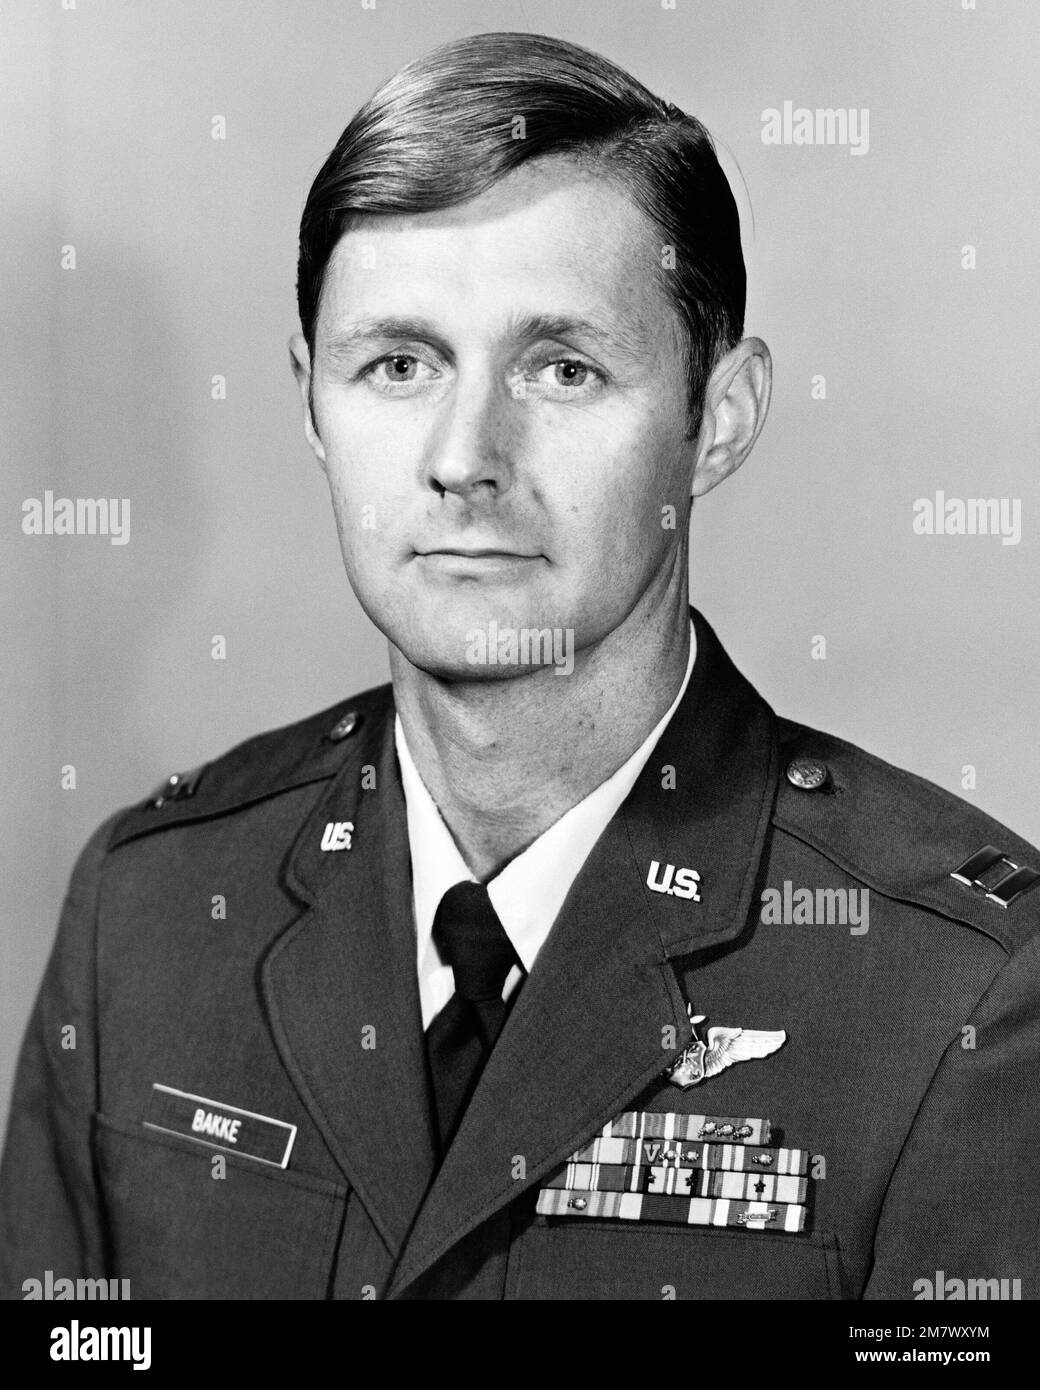 Portrait of Captain Richard Lynn Bakke, United States Air Force, killed in the attempt to rescue the US hostages from Iran. Country: Unknown Stock Photo